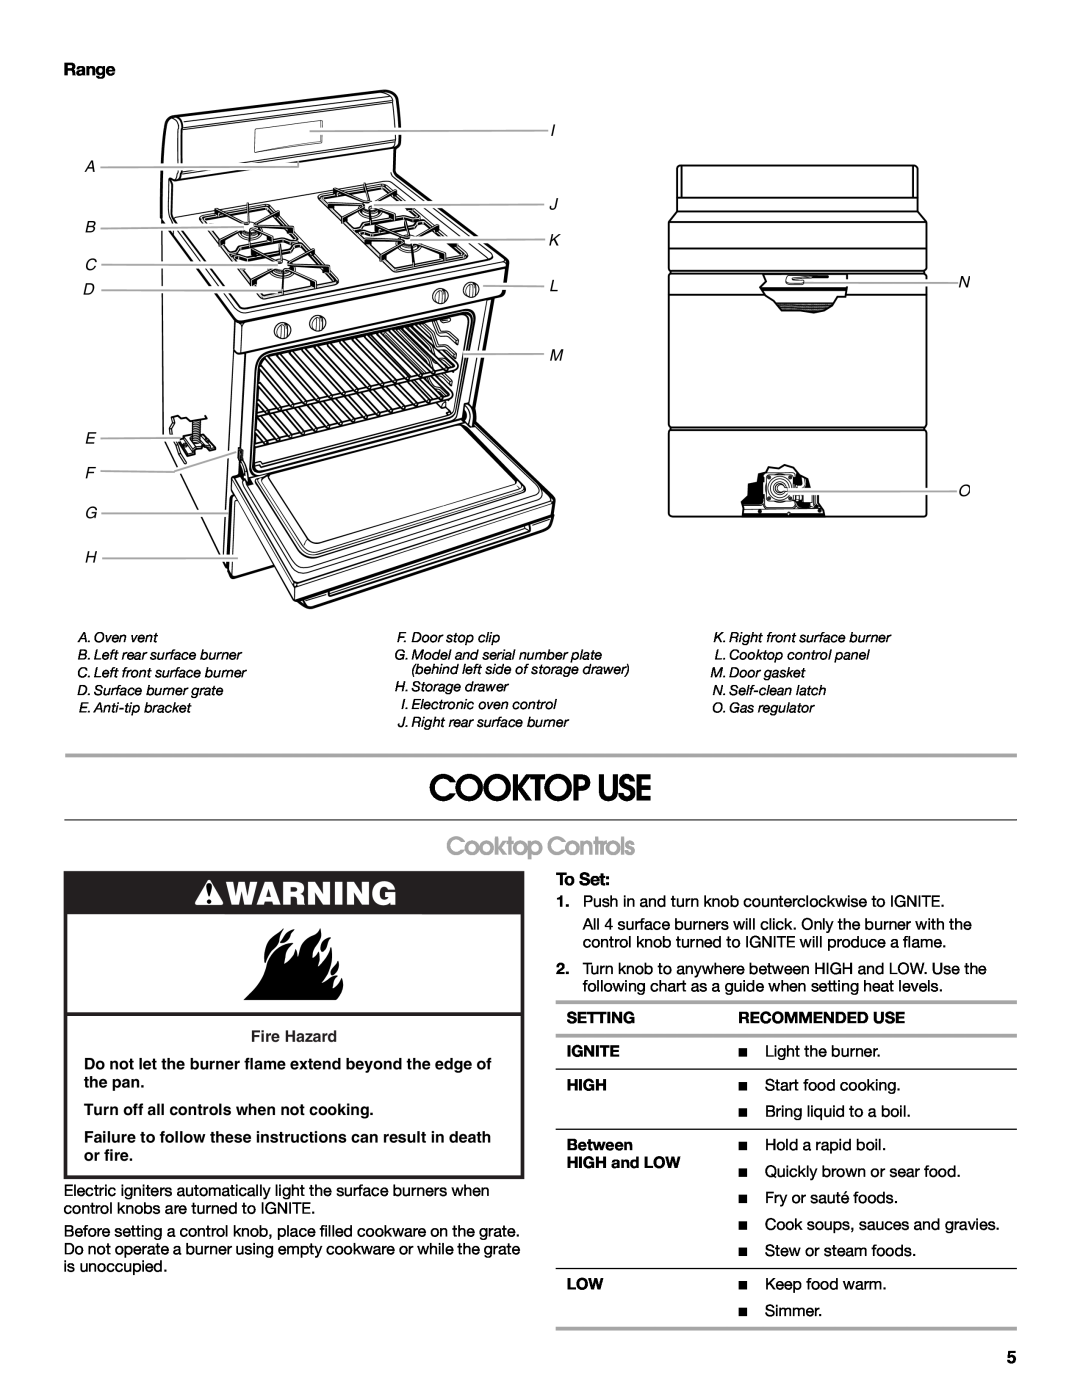 Estate W10017560 Cooktop Use, Cooktop Controls, Fire Hazard, Do not let the burner flame extend beyond the edge of the pan 